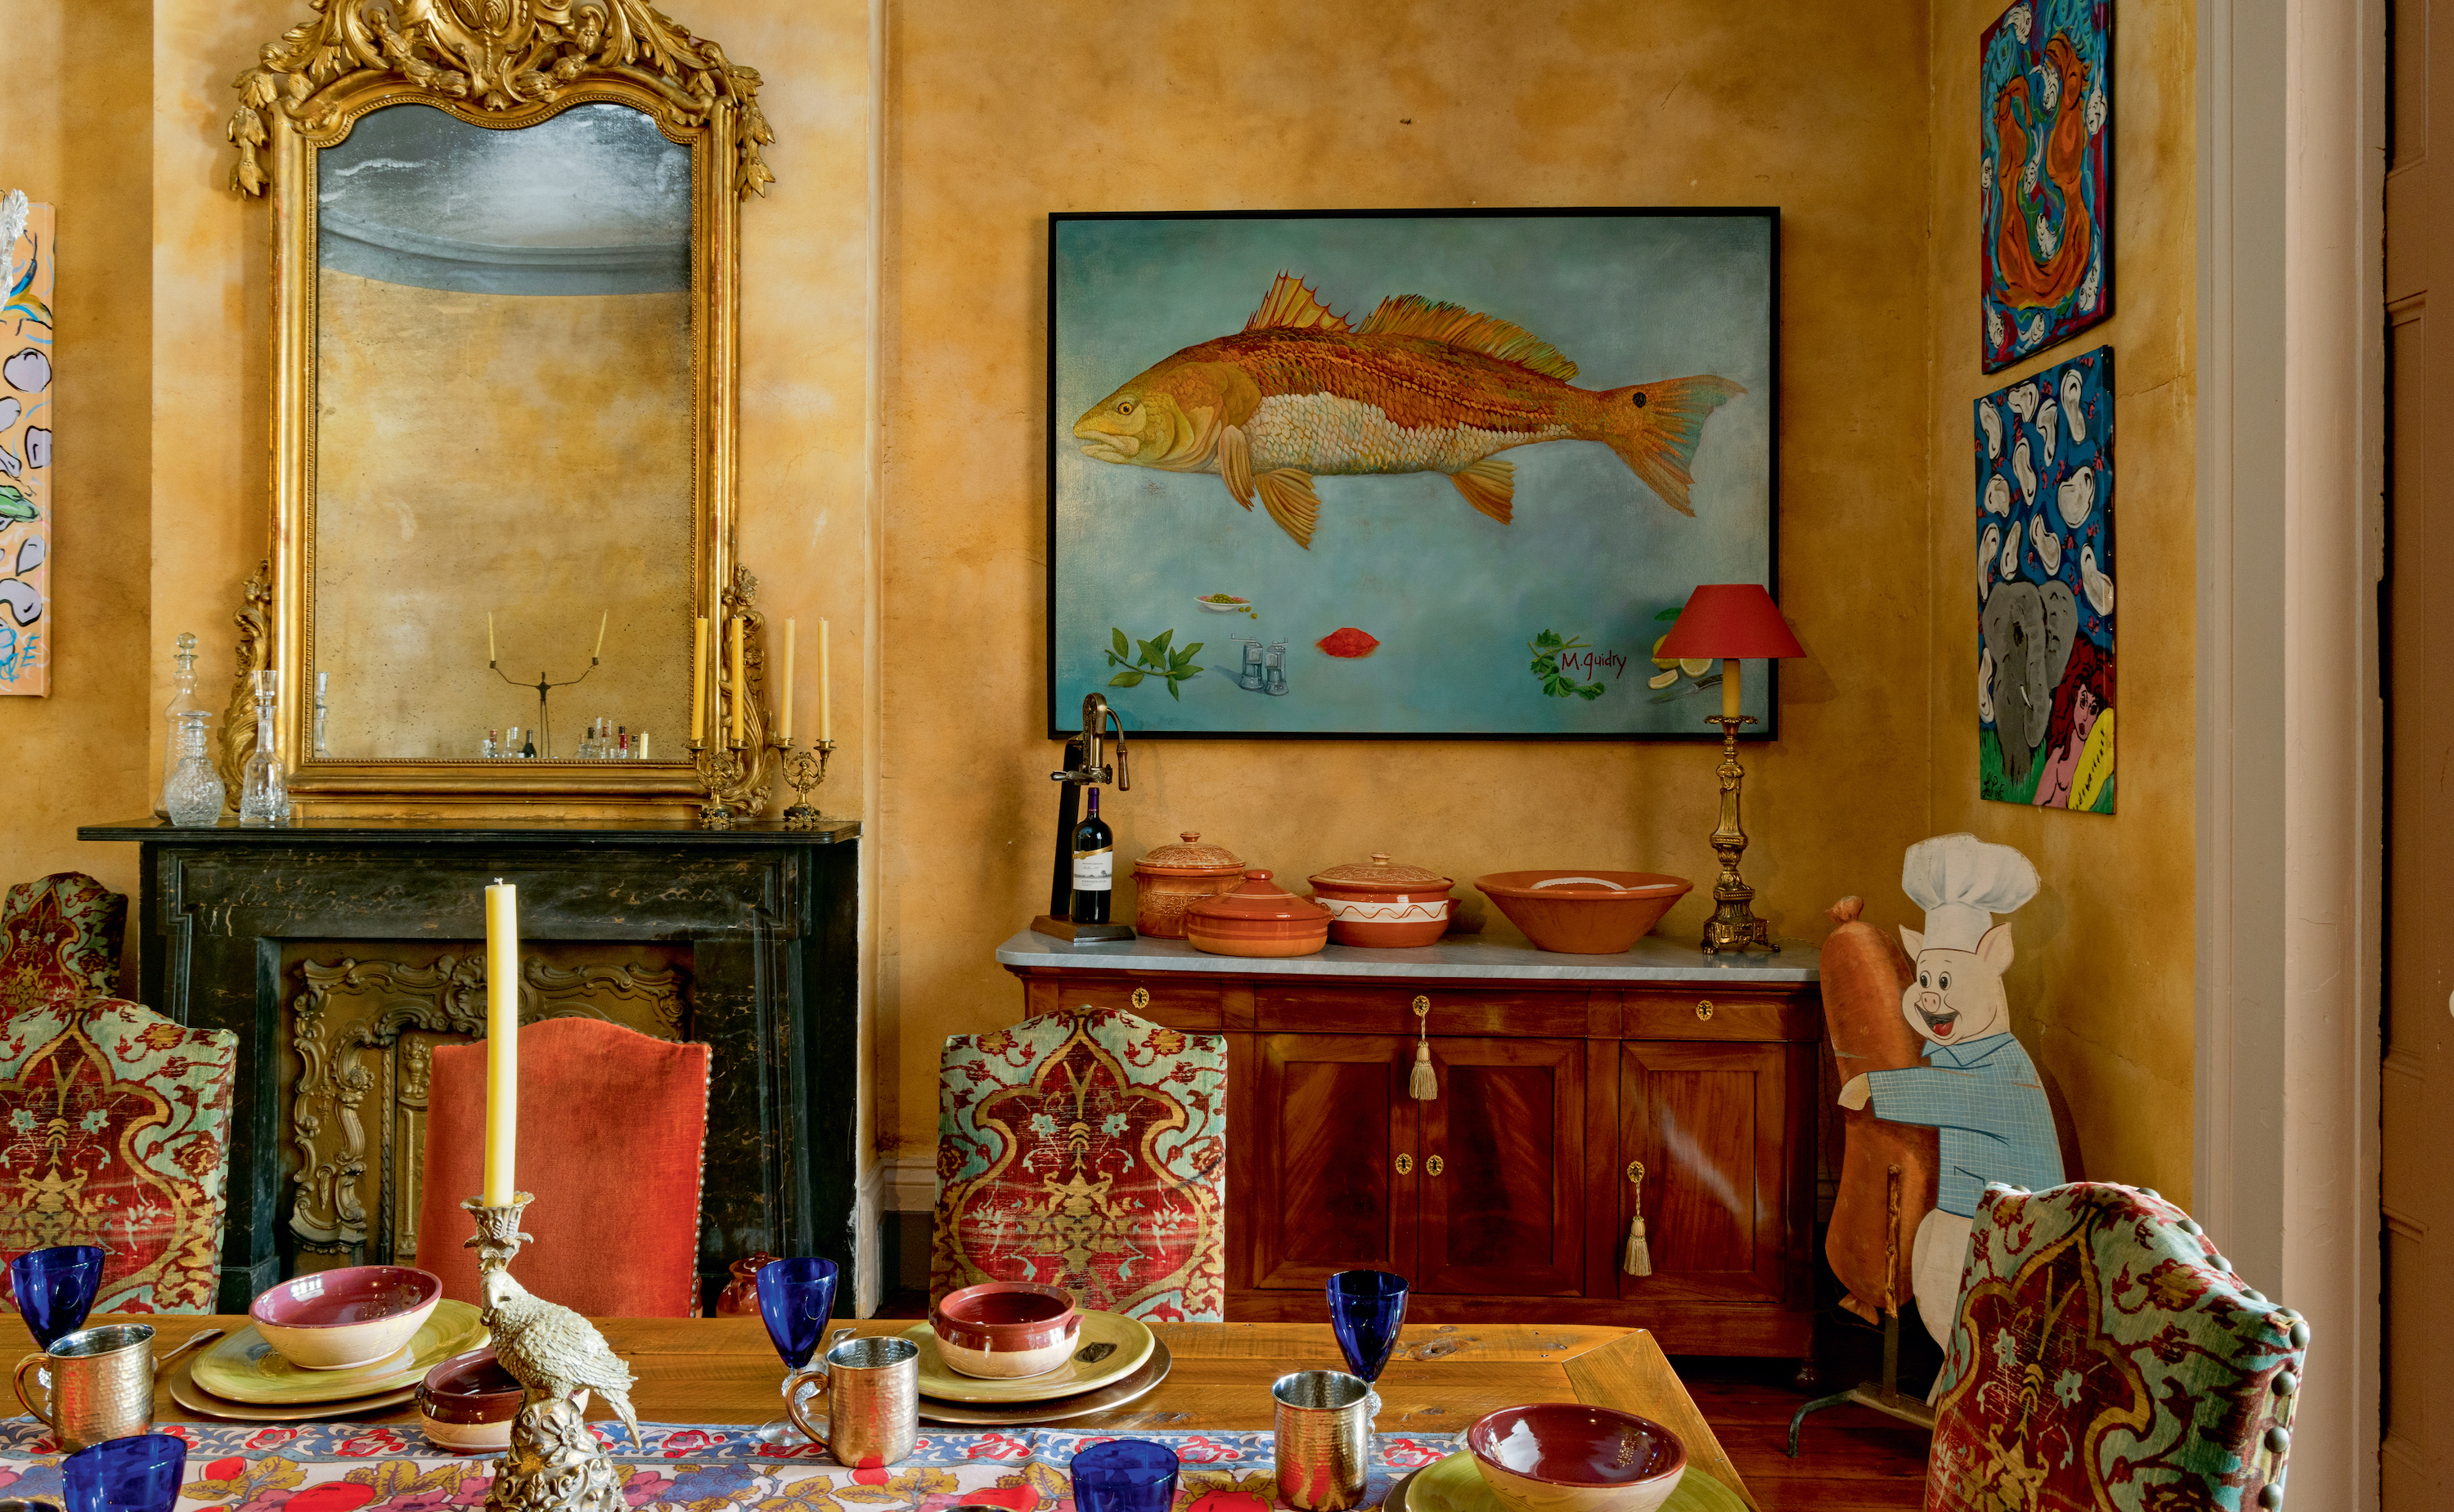 A yellow dining room with eclectic art, a wood dining table with patterned chairs, a fireplace, and a wood cabinet. A blue and brown painting of a fish hangs on the wall.